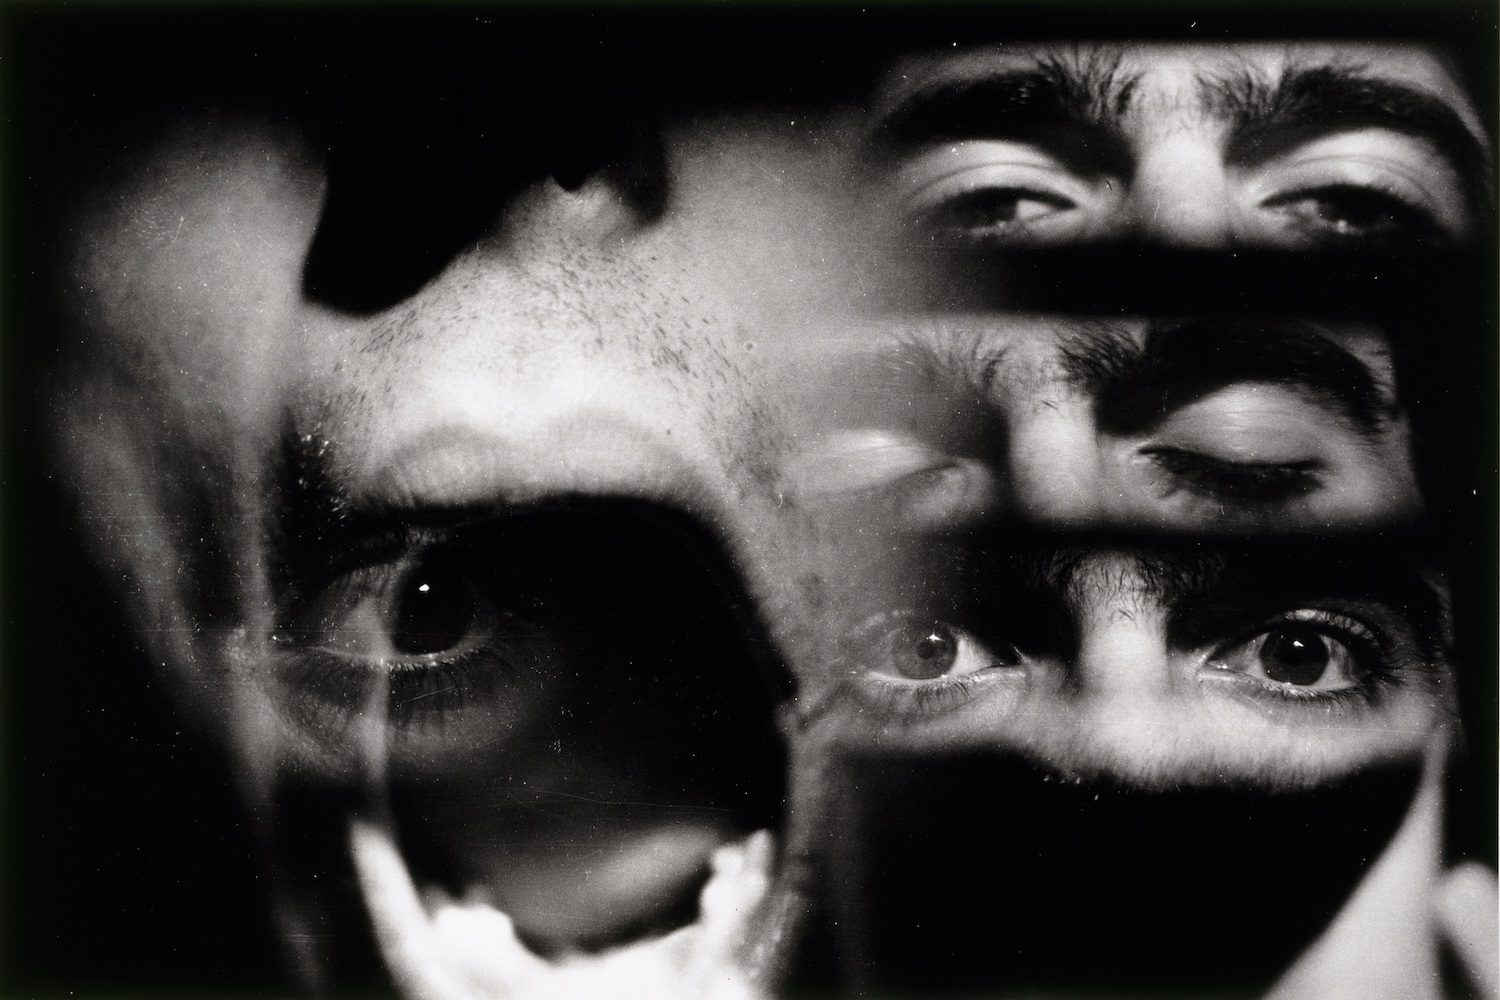 Nathan Lerner, 'The Seeing Mouth (La bouche qui voit)', 1940. Centre Pompidou, MNAM-CCI/Philippe Migeat/Dist. RMN-GP. © 2022 Kiyoko Lerner / Artists Rights Society (ARS).